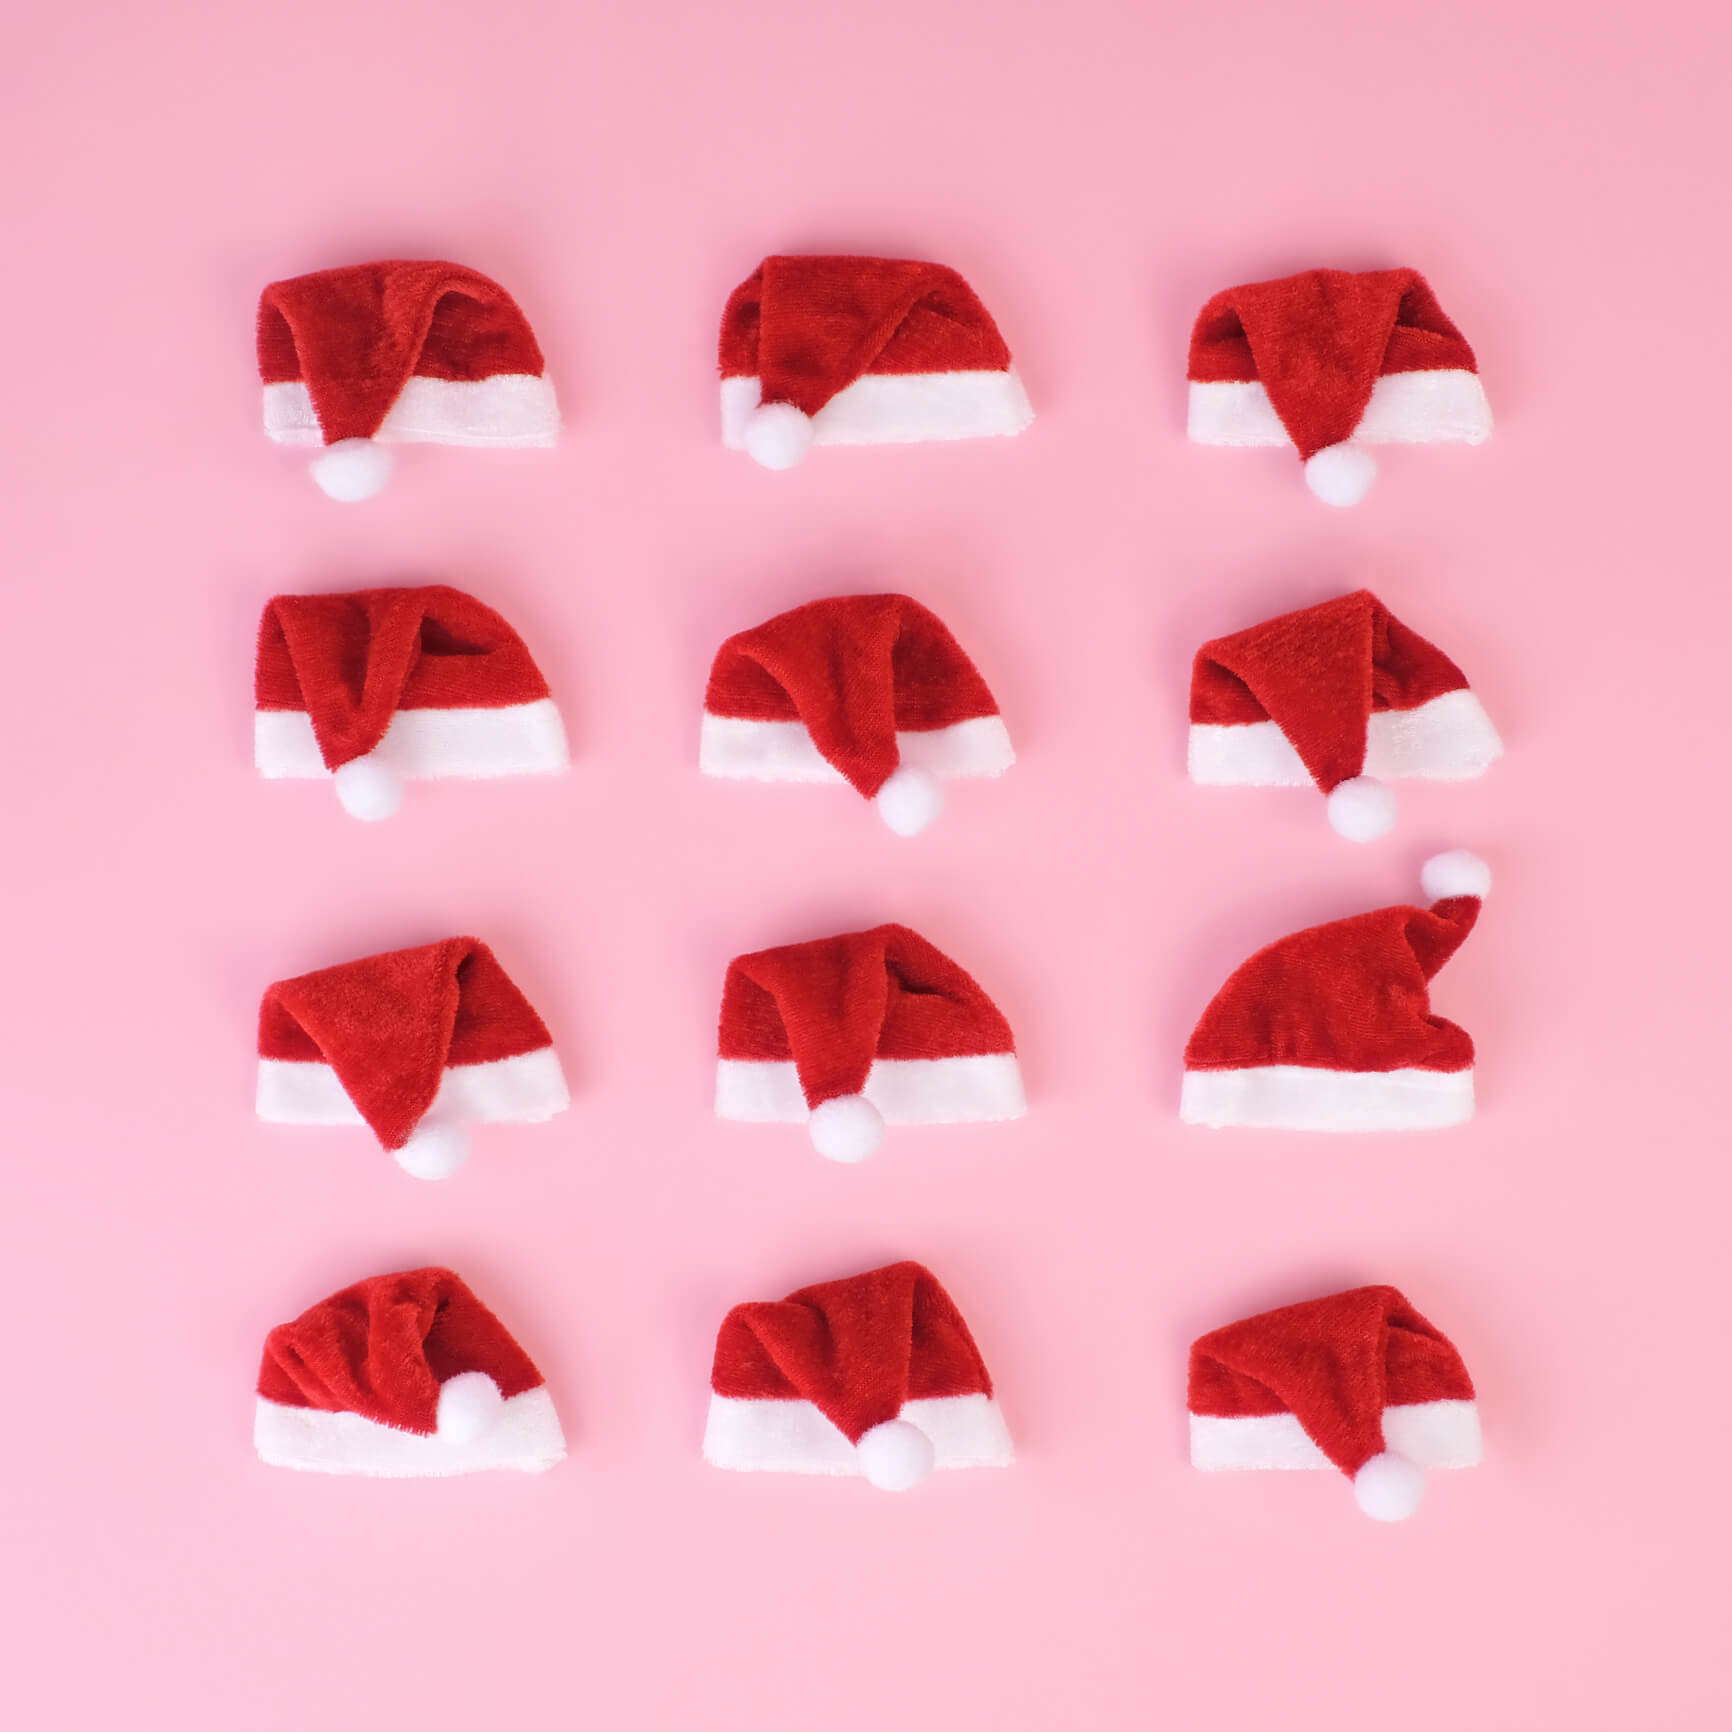 Miniature red Santa hats arranged in a grid on a pink background.